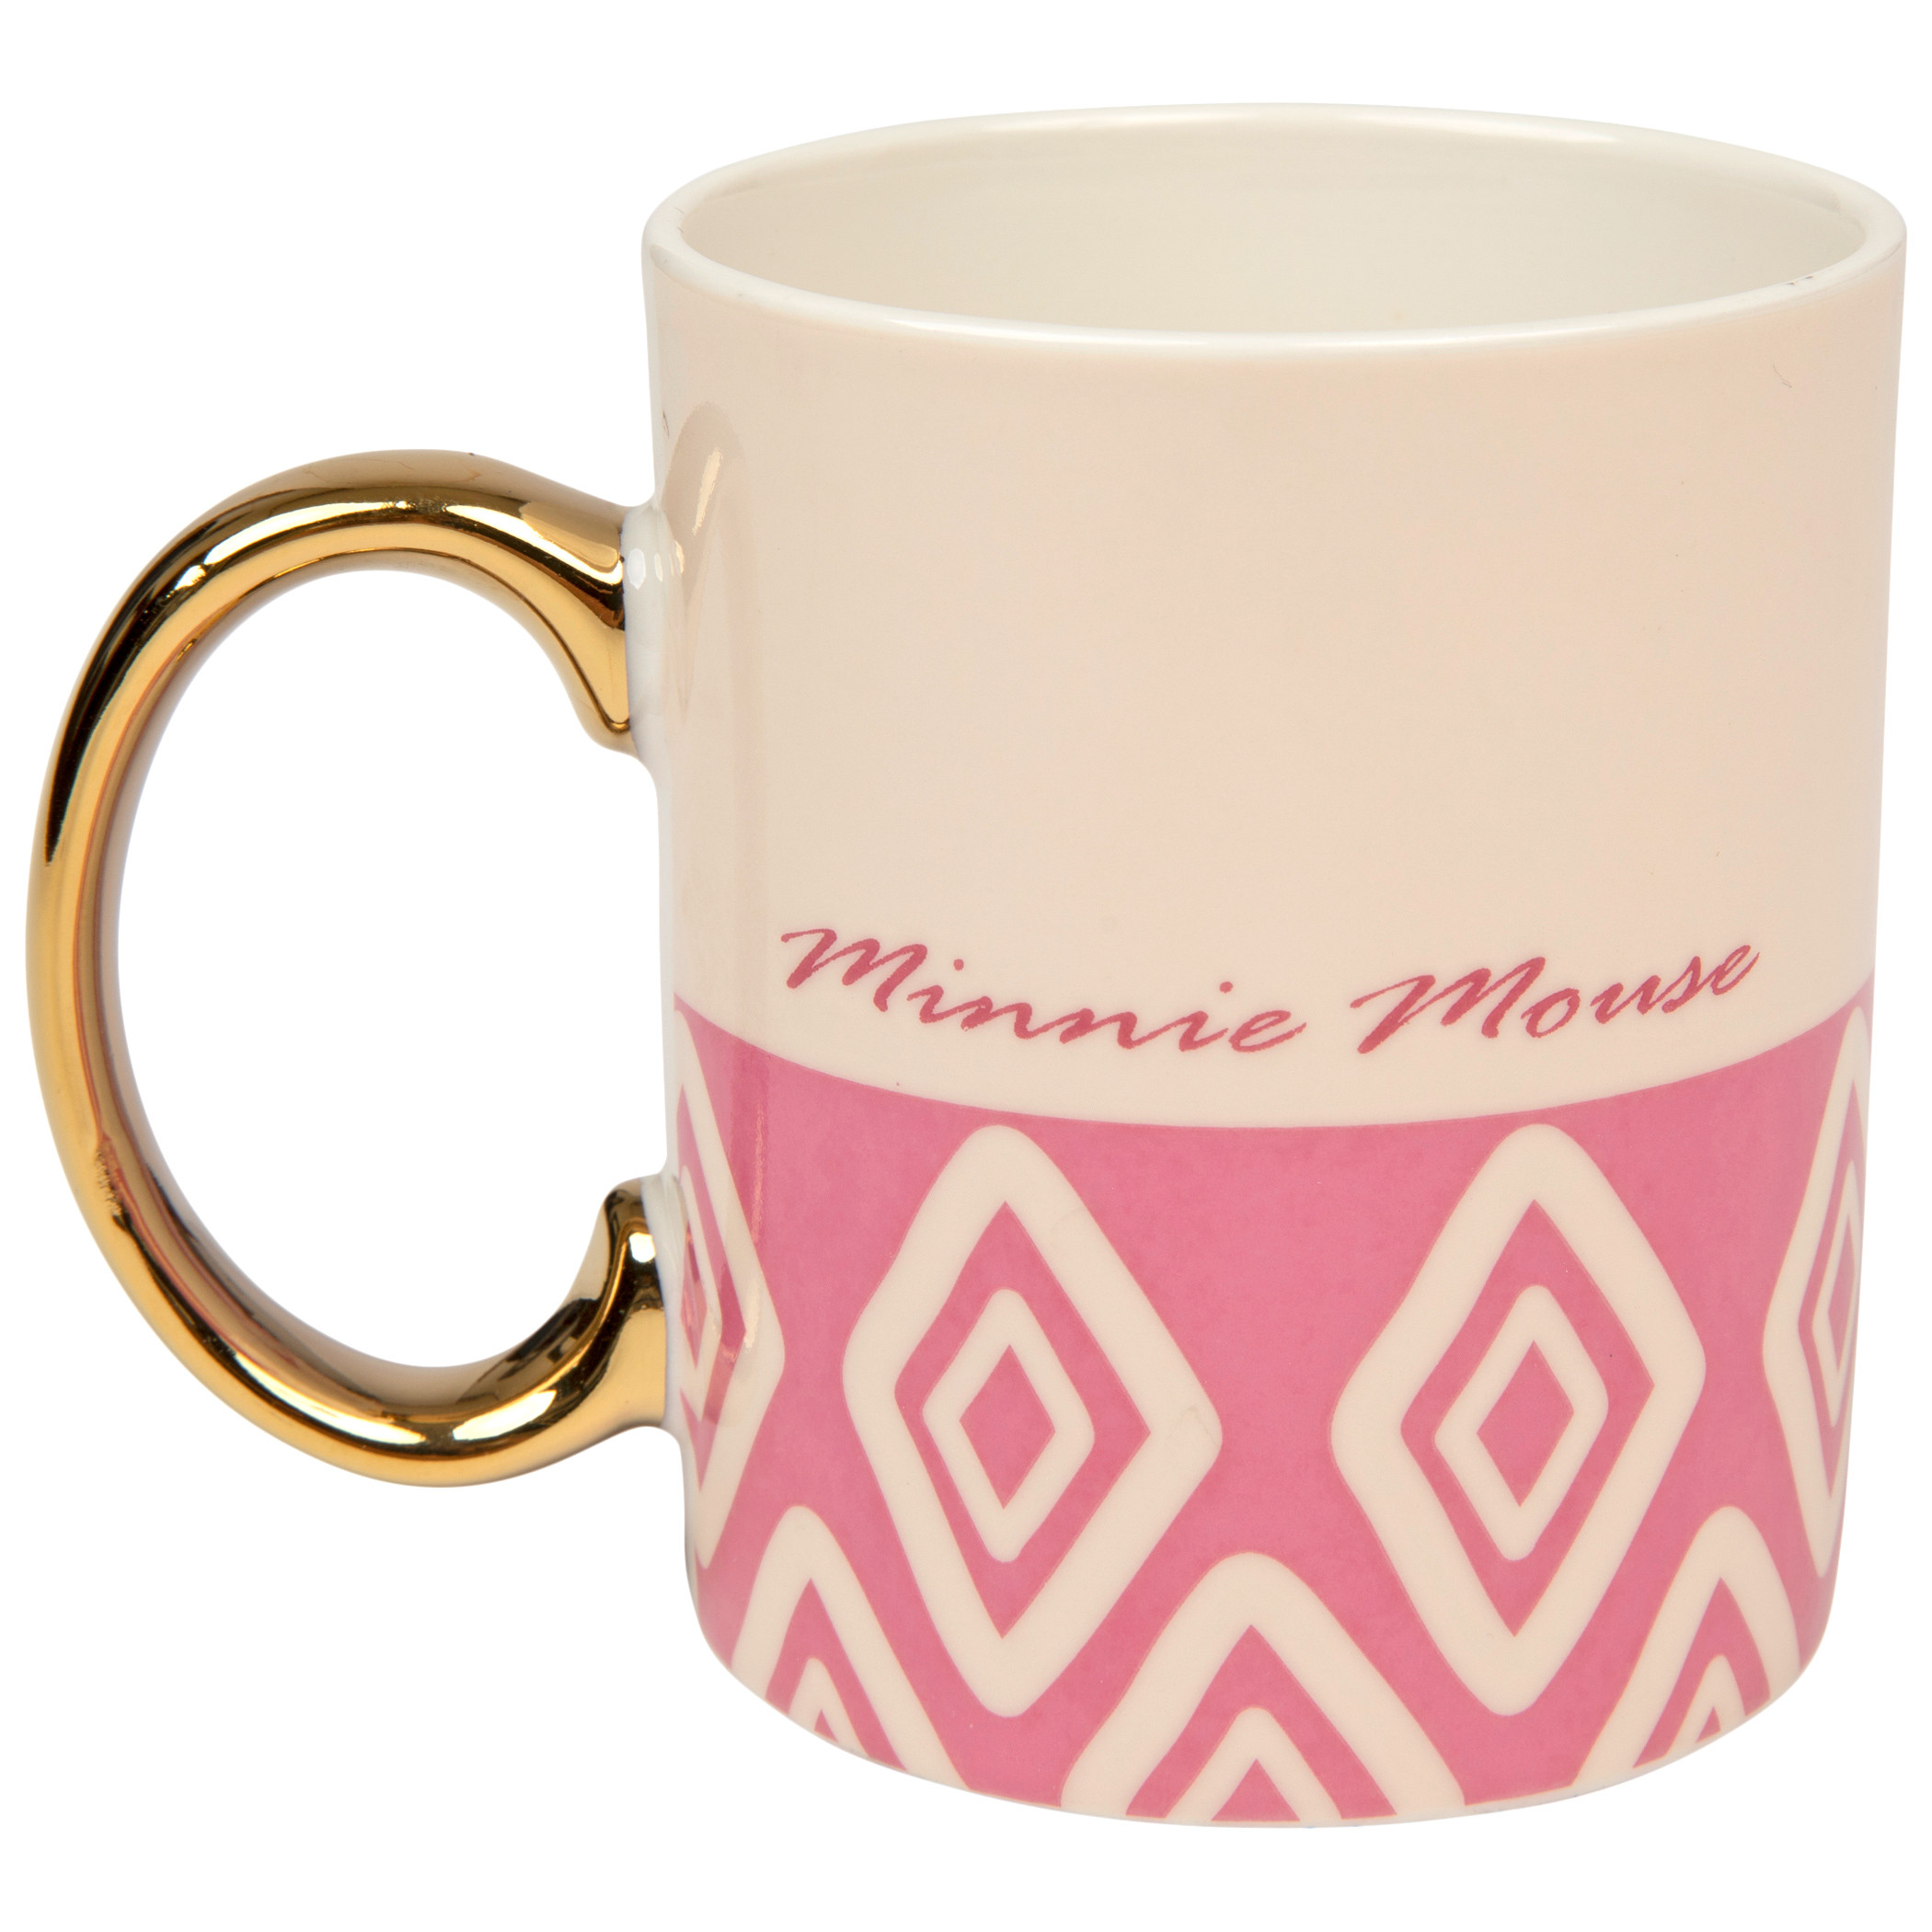 Disney Minnie Mouse Pattern With Gold Handle 11 Ounce Ceramic Mug